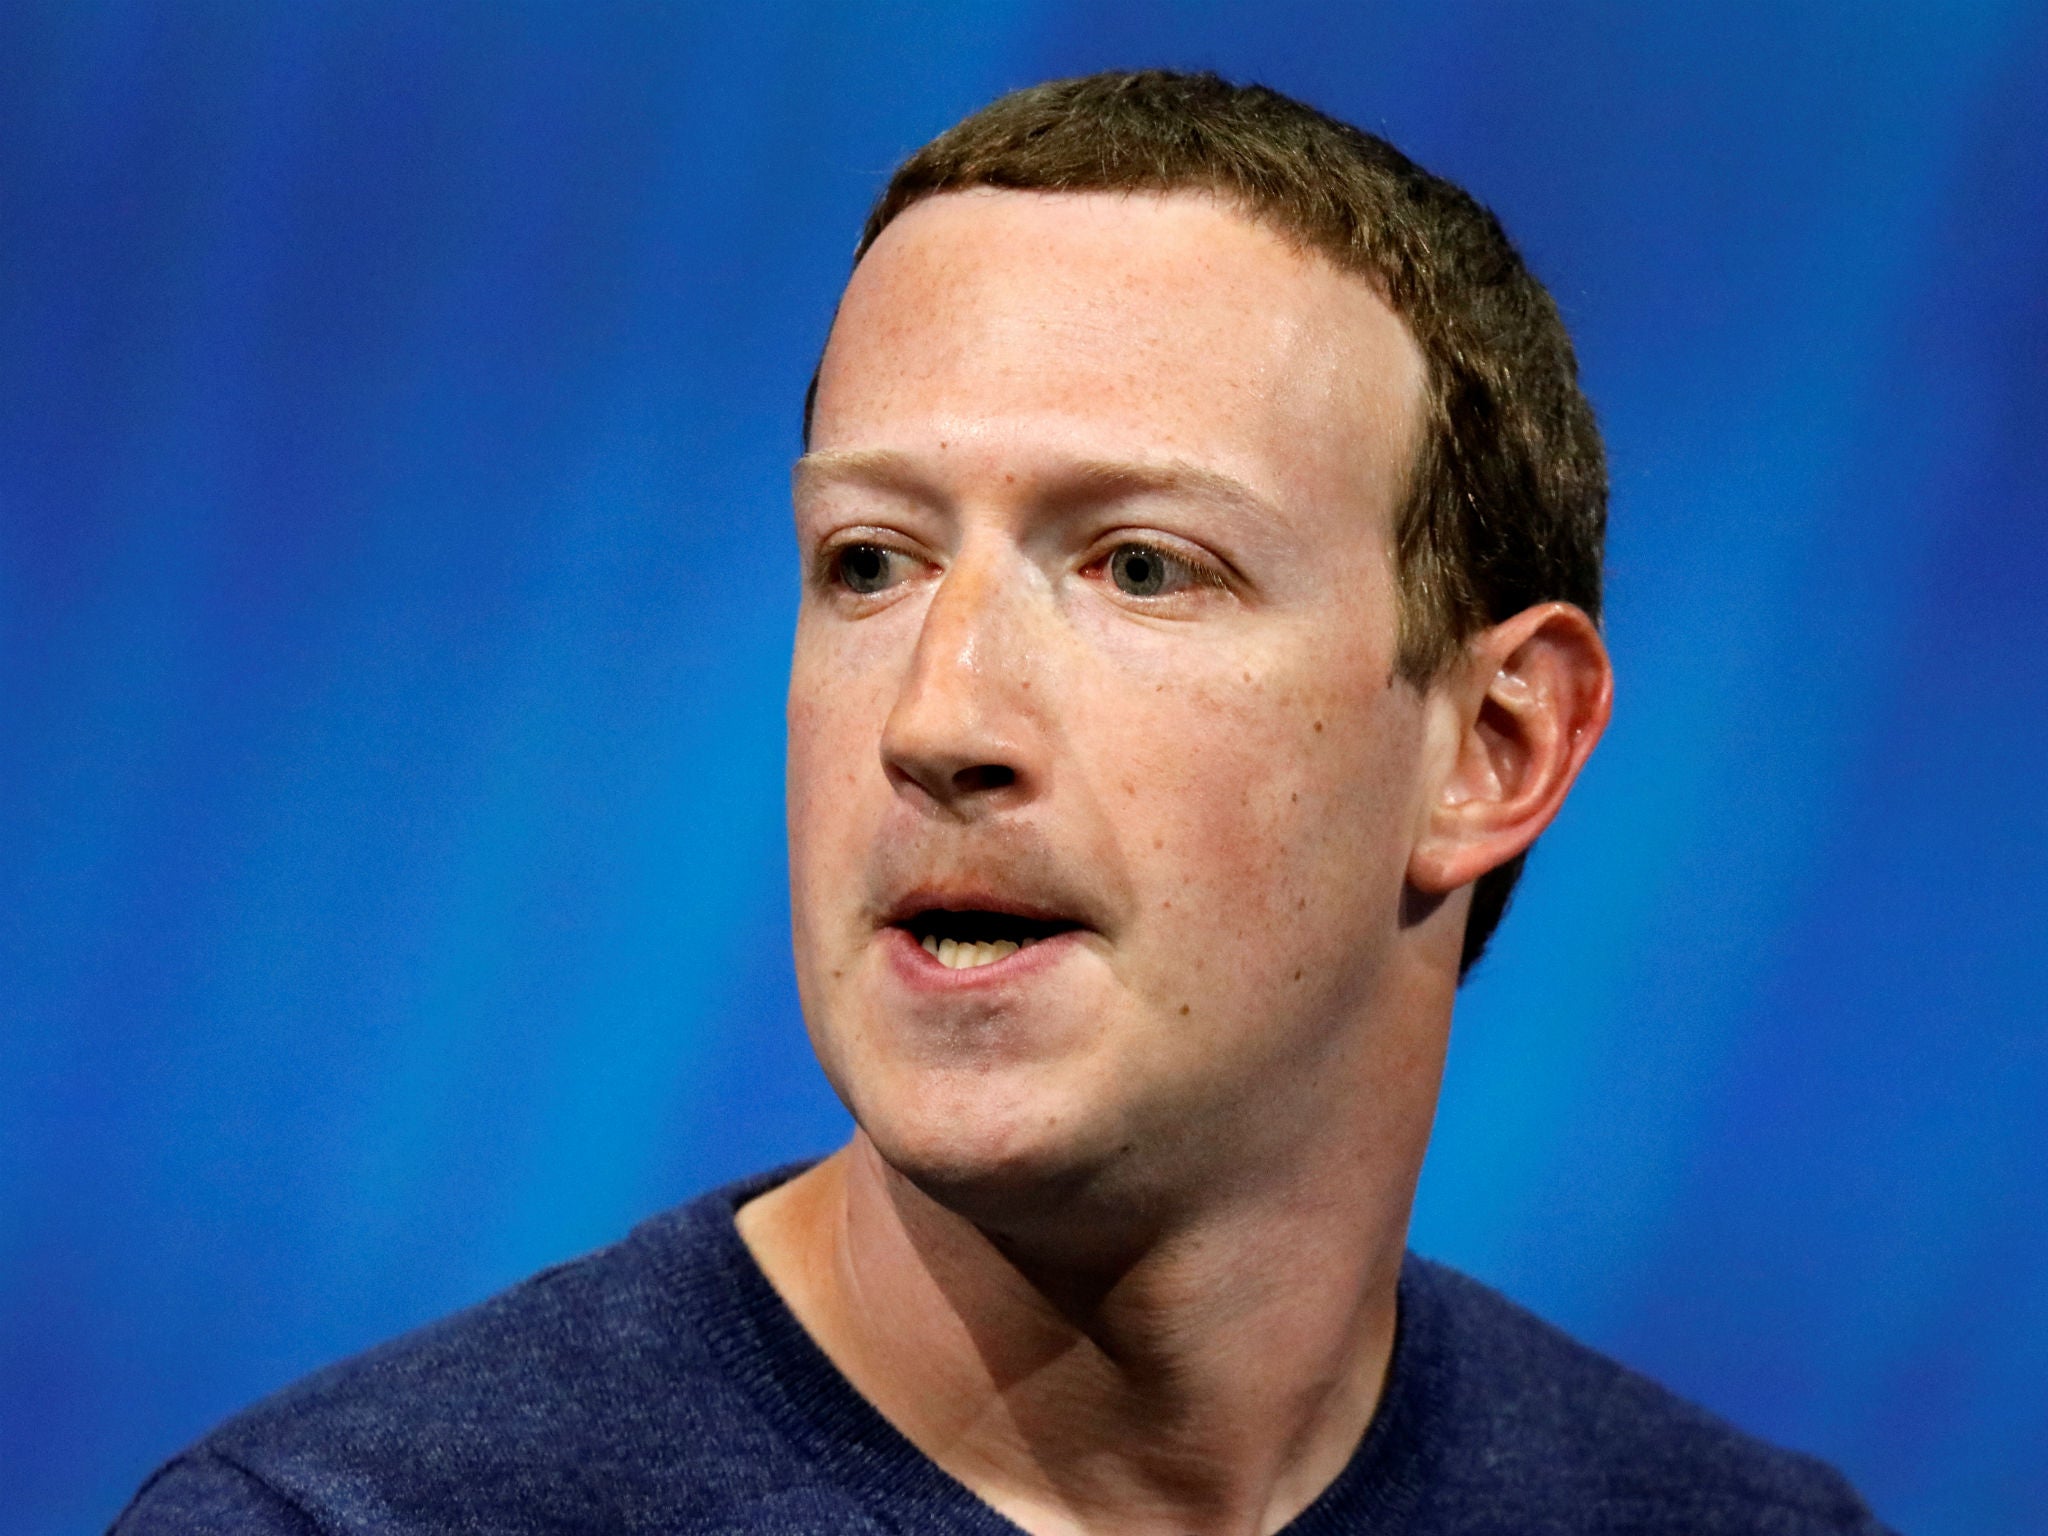 Facebook founder and CEO Mark Zuckerberg told shareholders that the business was thriving